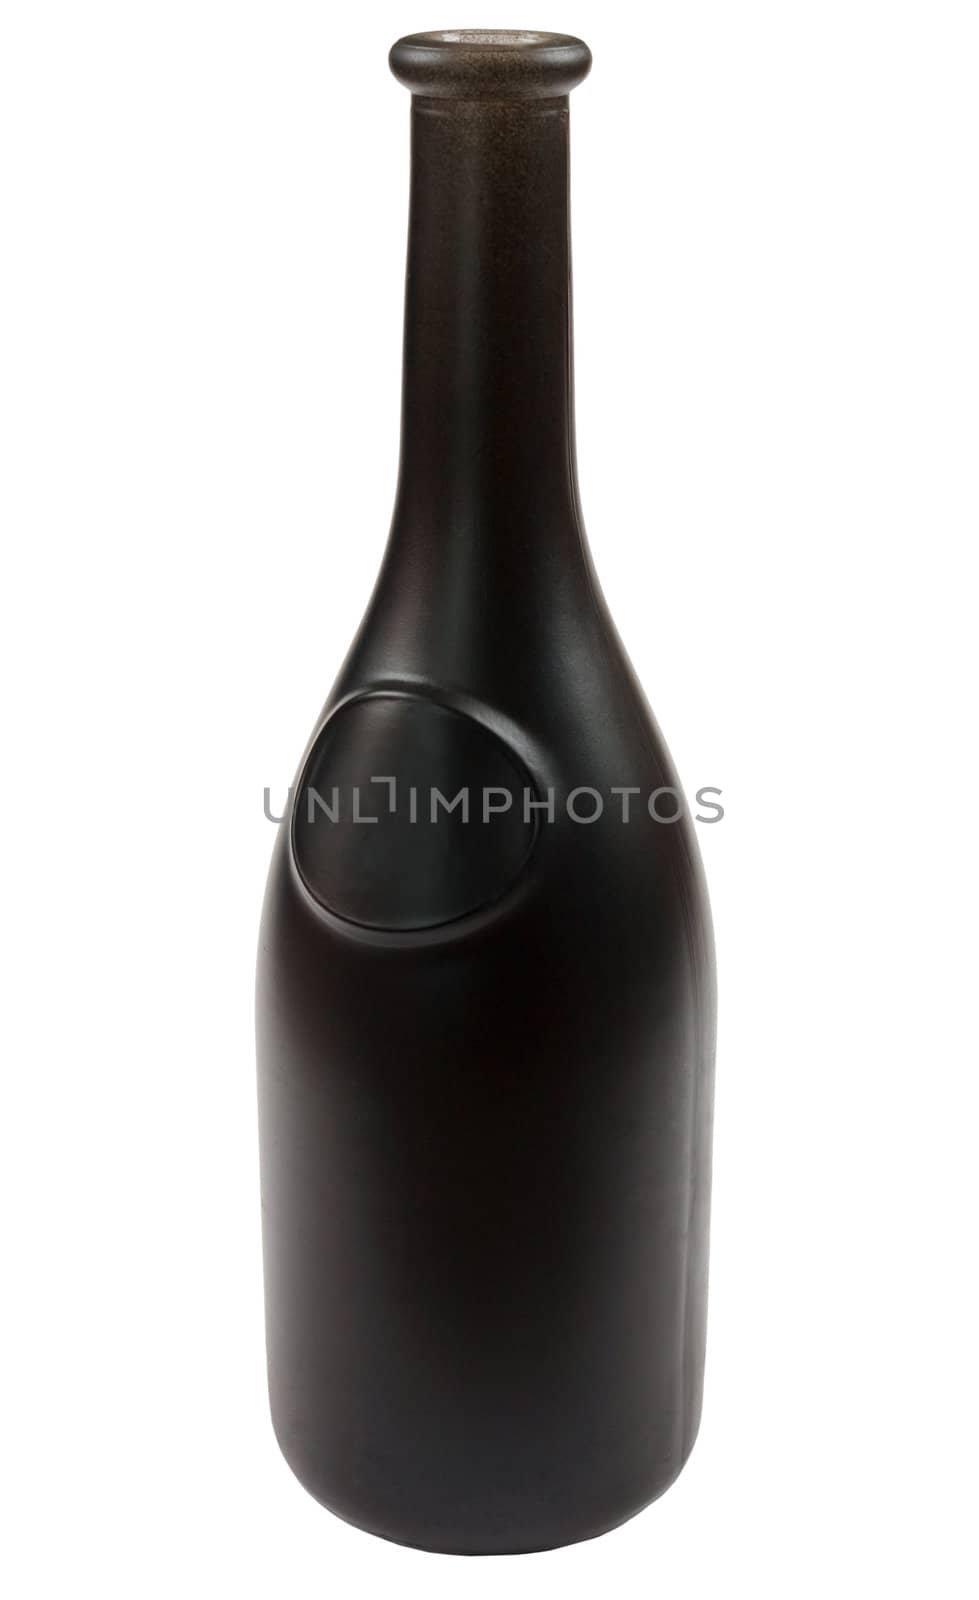 Red wine bottle on a white background